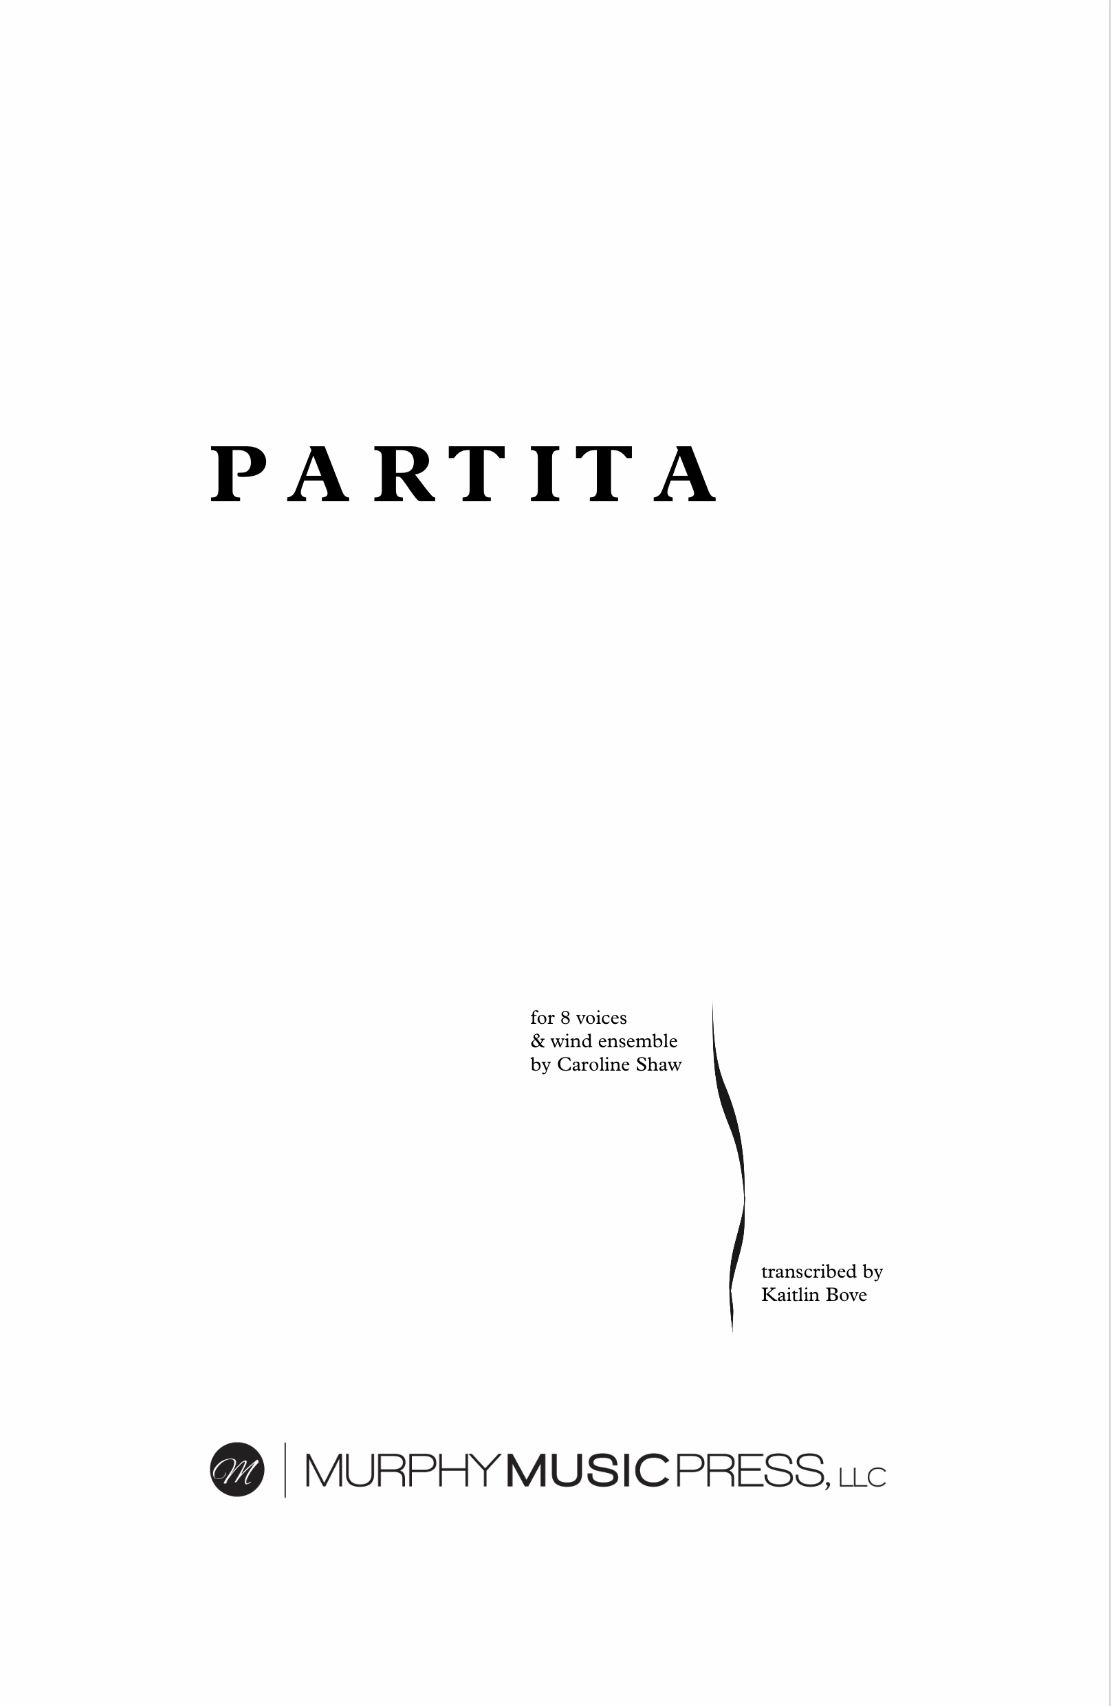 Partita For 8 Voices And Wind Ensemble (Score Only) by Caroline Shaw, trans Bove